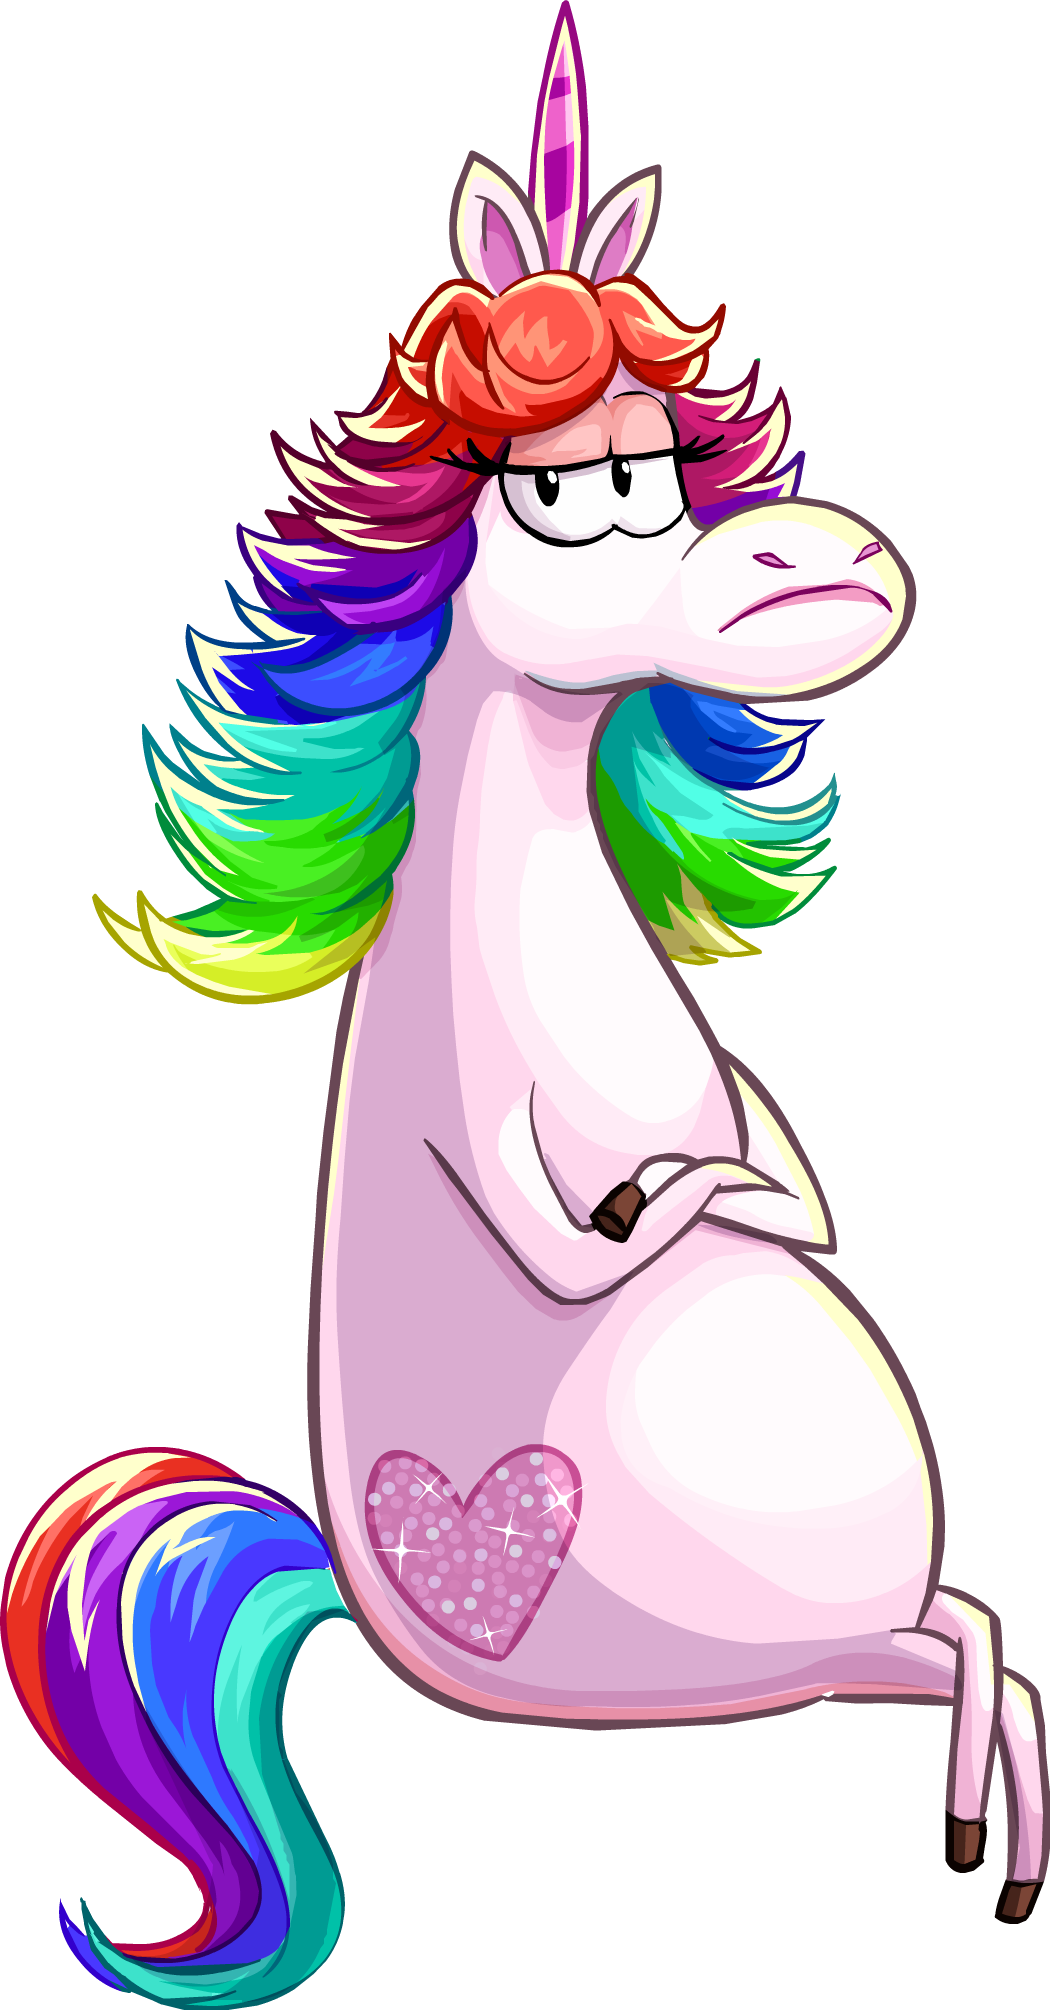 https://static.wikia.nocookie.net/spoof/images/0/0a/Rainbow_Unicorn.png/revision/latest?cb=20180815095246